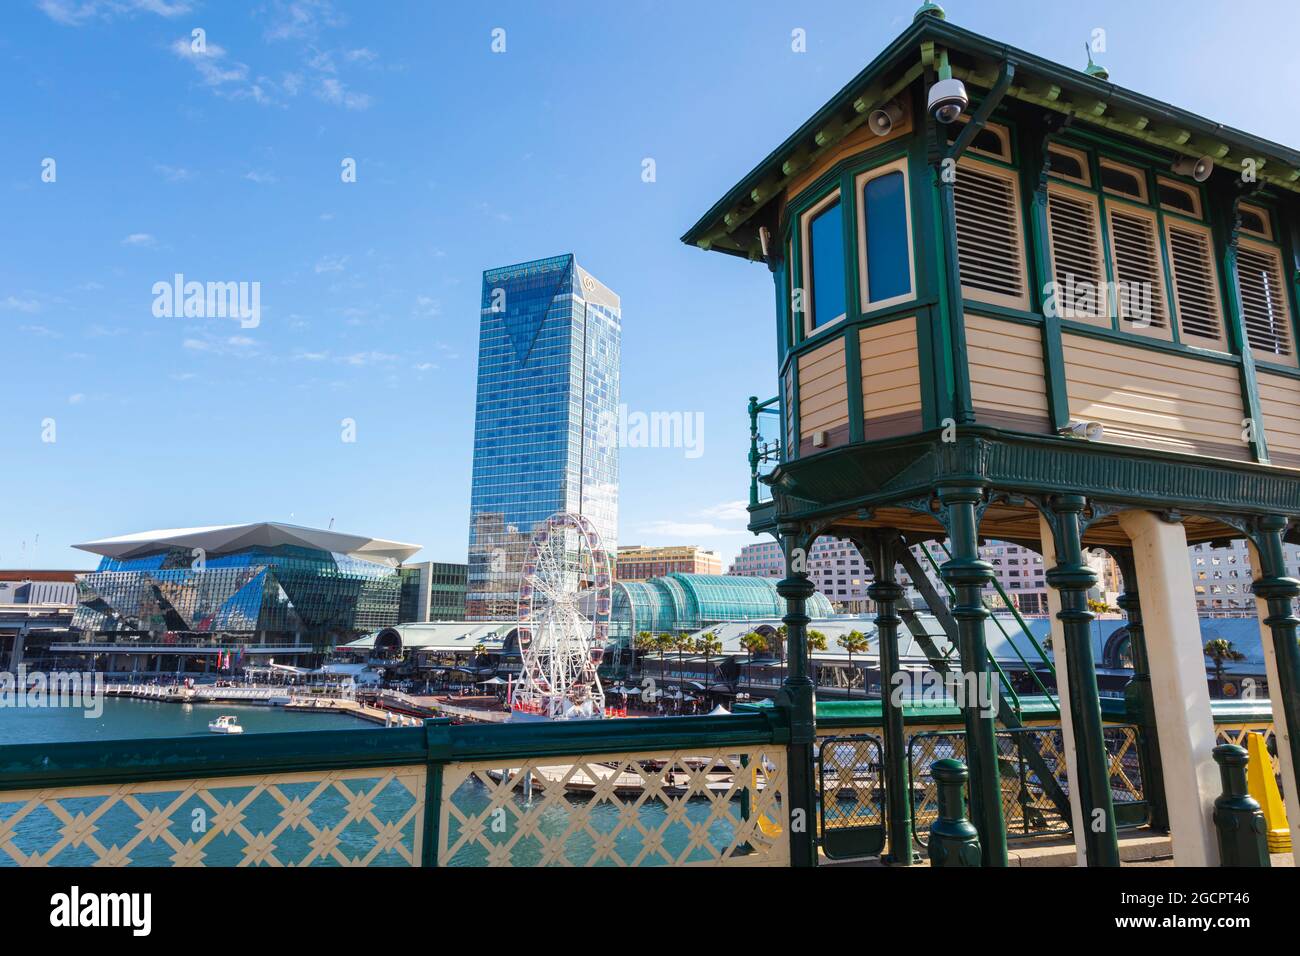 Sydney, Australia - October 14, 2020: Observation tower at Darling Harbour, Sydney. The pier opposite of Cockle Bay Wharf. A Ferris wheel in the backg Stock Photo